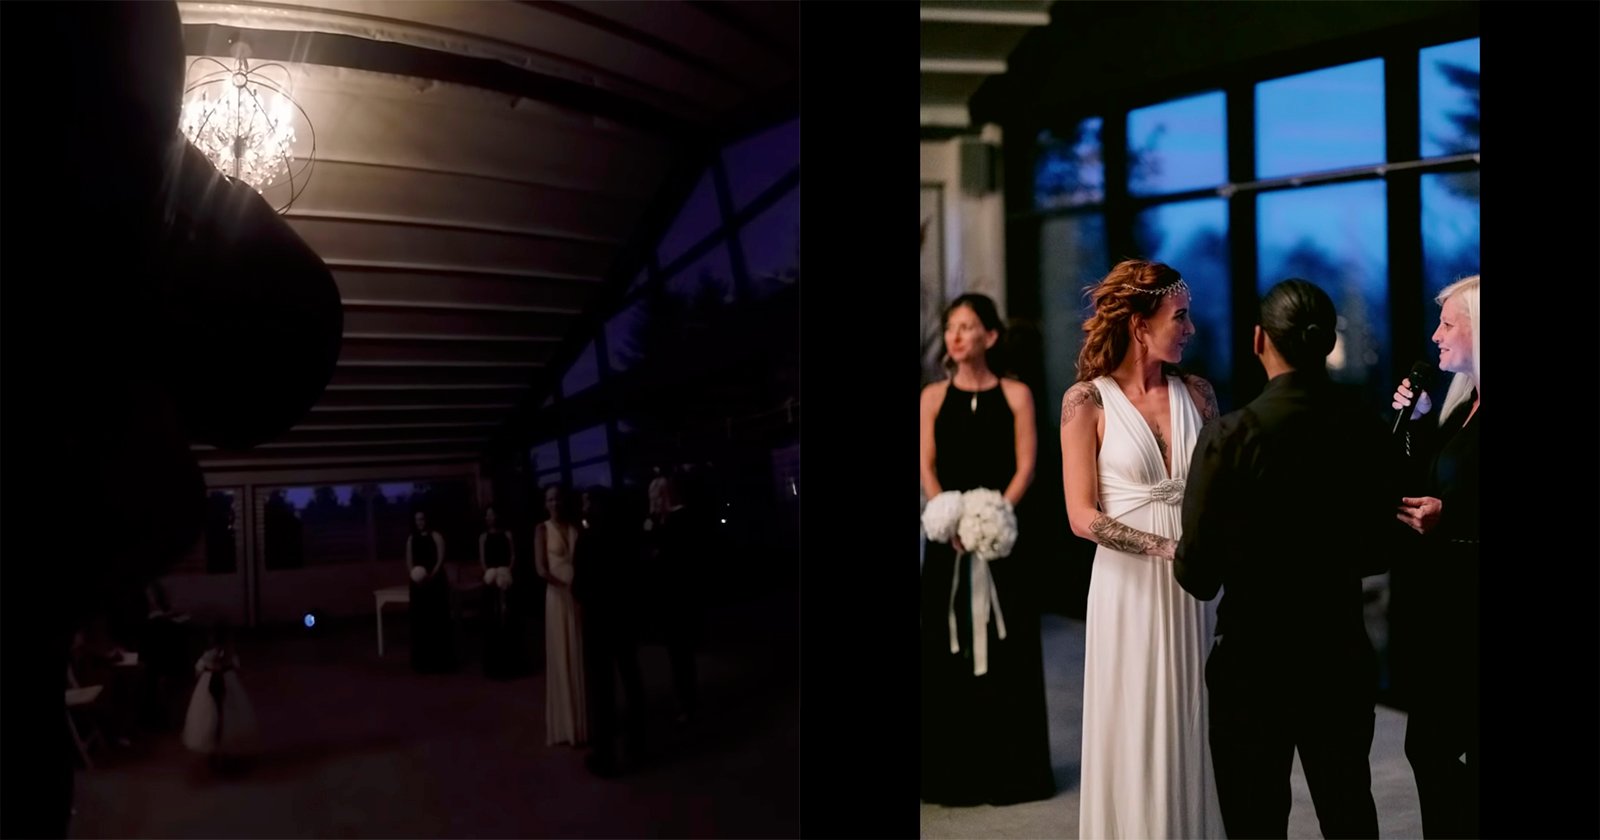 Photographing an Entire Wedding at ISO 5000 After Dark